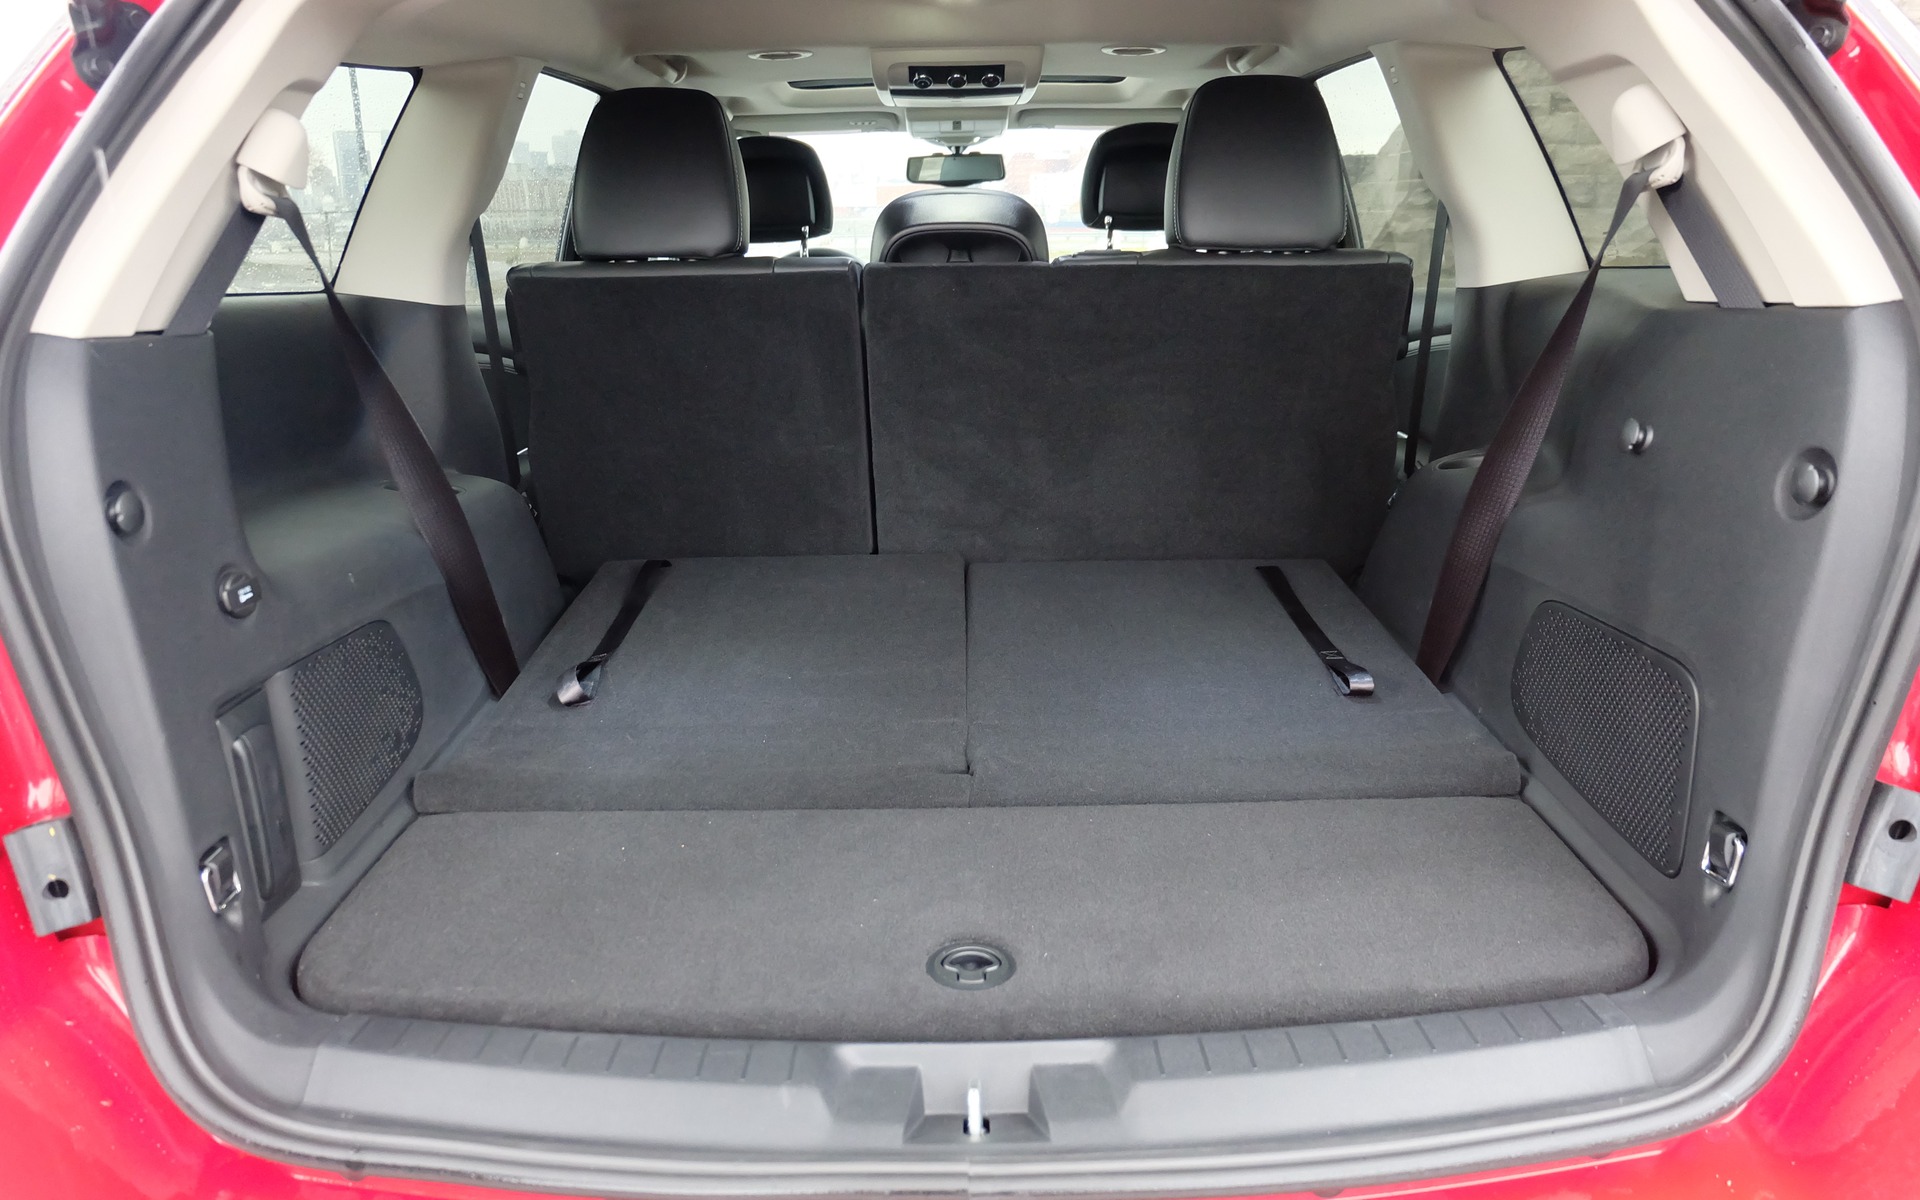 Lower the rear seats and you’ve got looooads of cargo space.